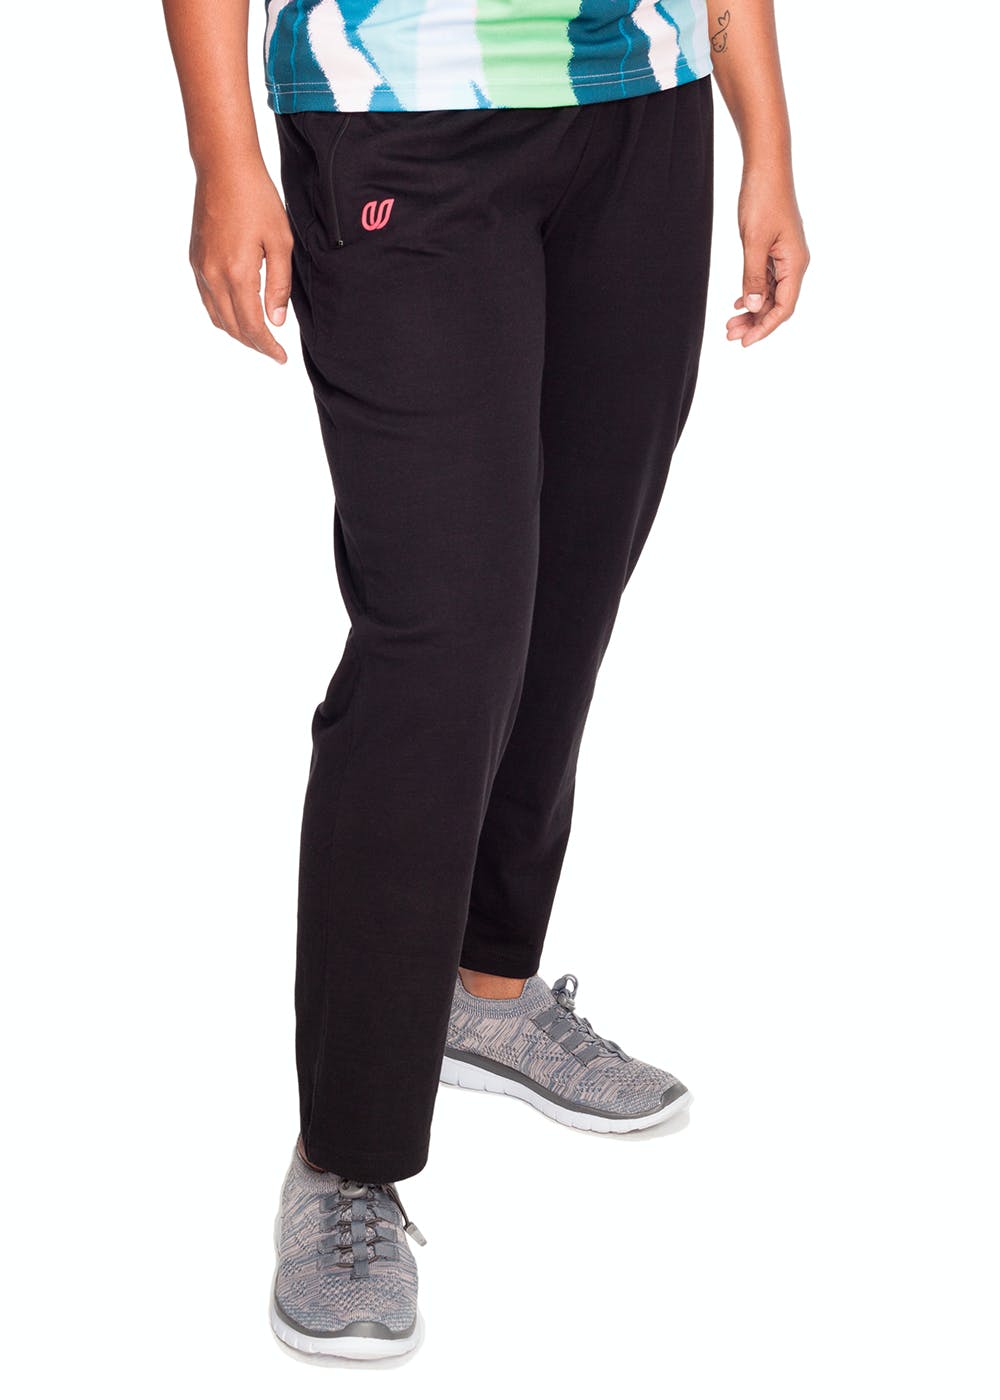 Plush Gym Track Pants by Cotton On Body Active Online | THE ICONIC |  Australia